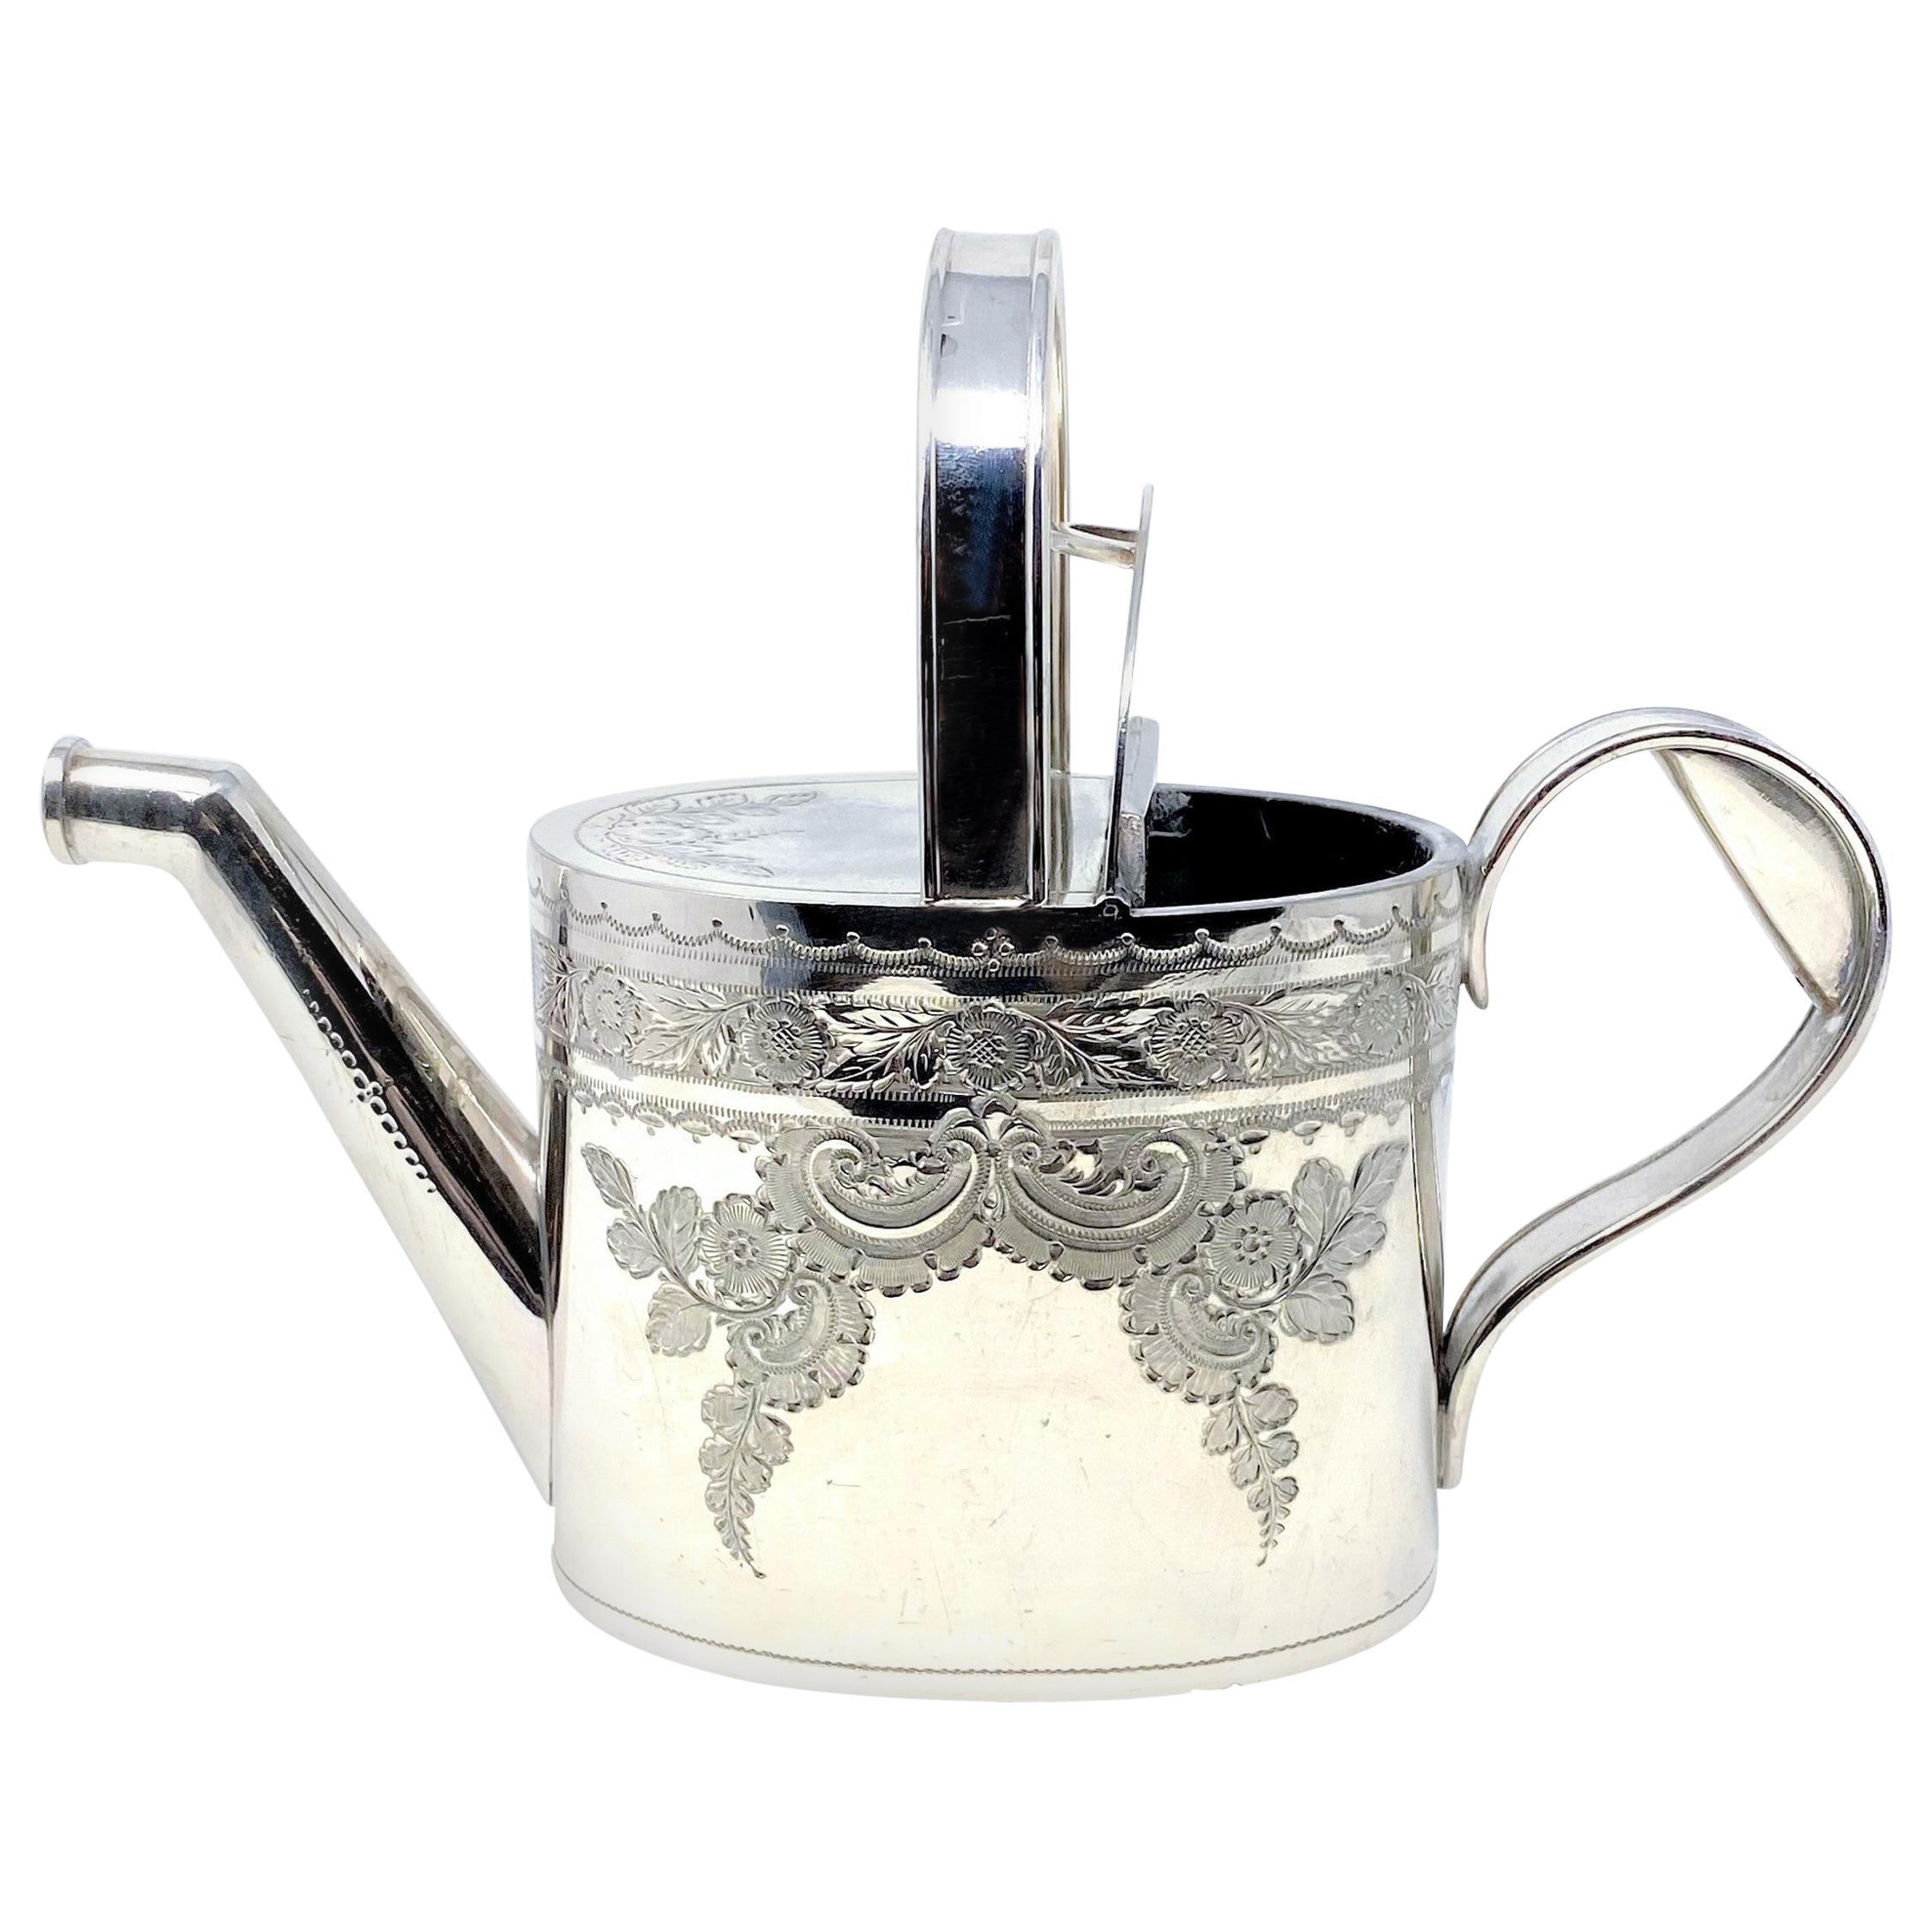 International Silver Company Garden Watering Pot Silverplated Can 